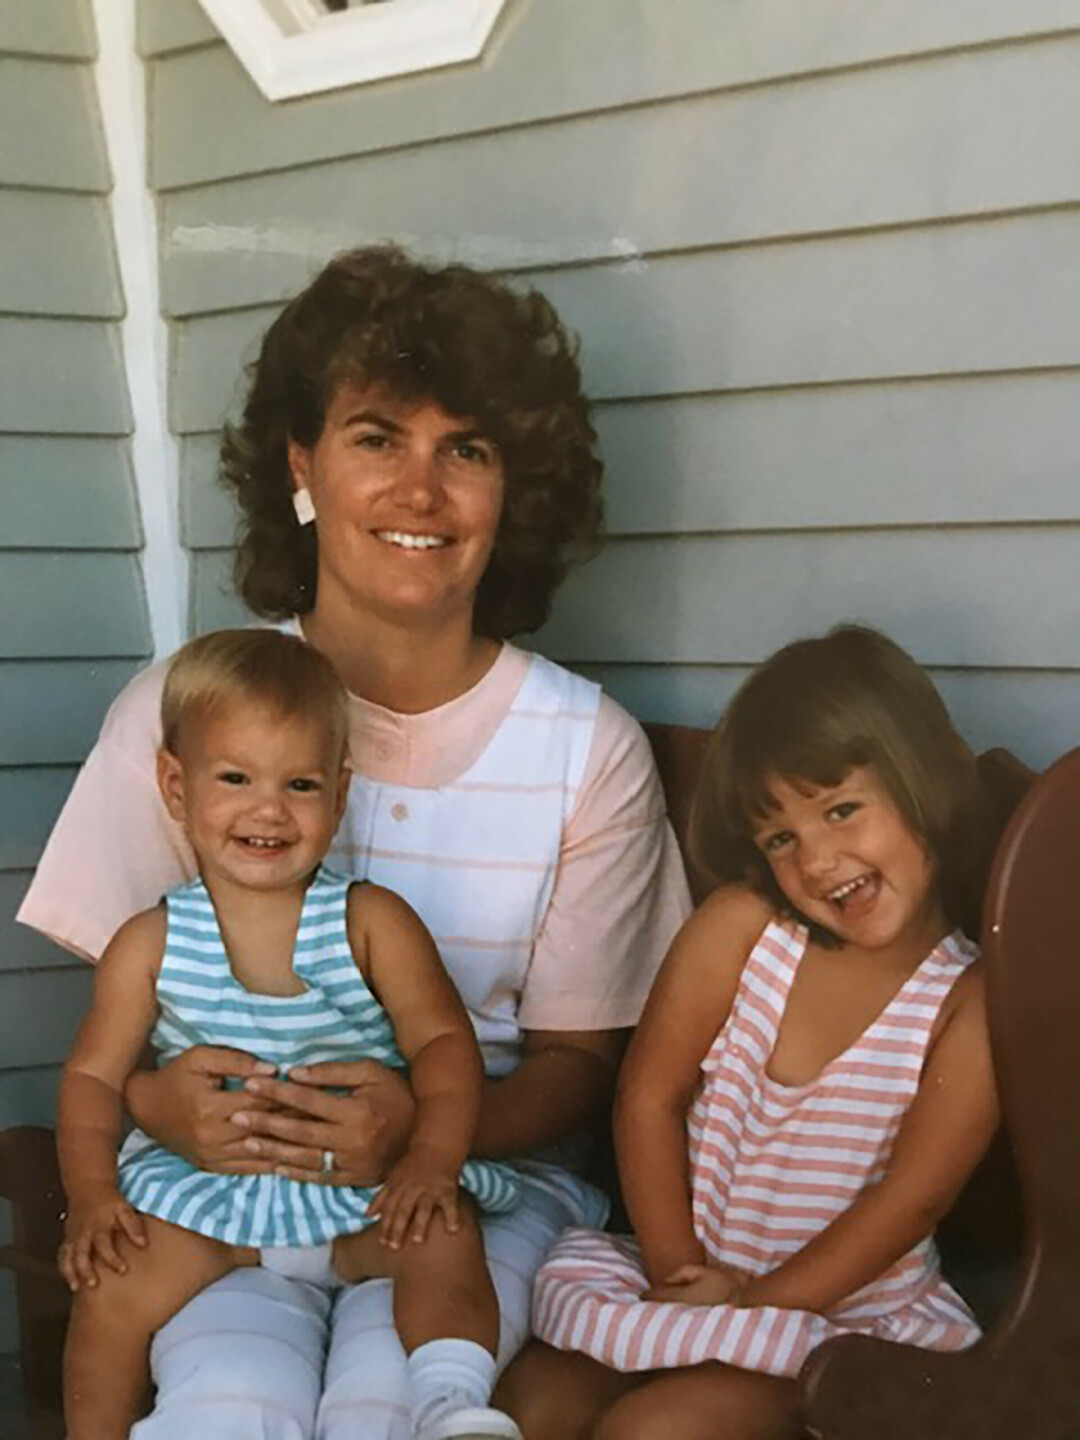 Diane Fahrman pictured with her two daughters, Katie and 